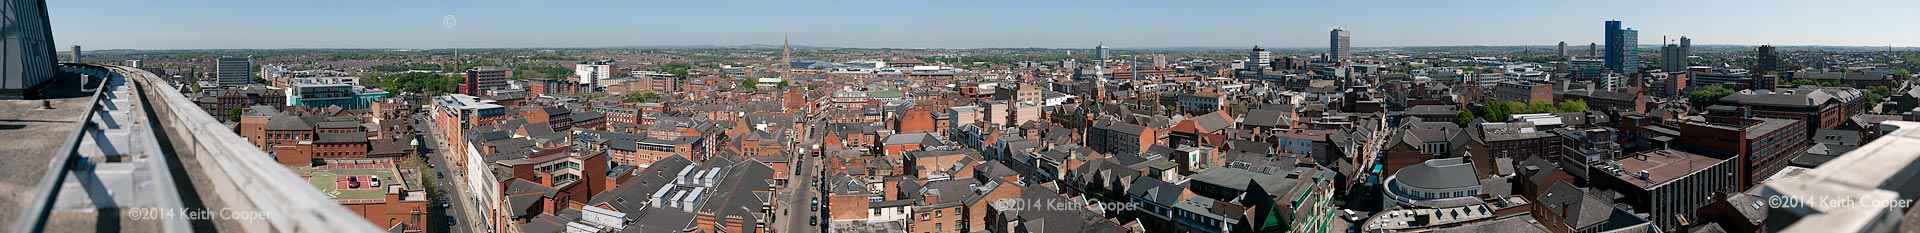 view of the city of Leicester from New walk centre 'A' block